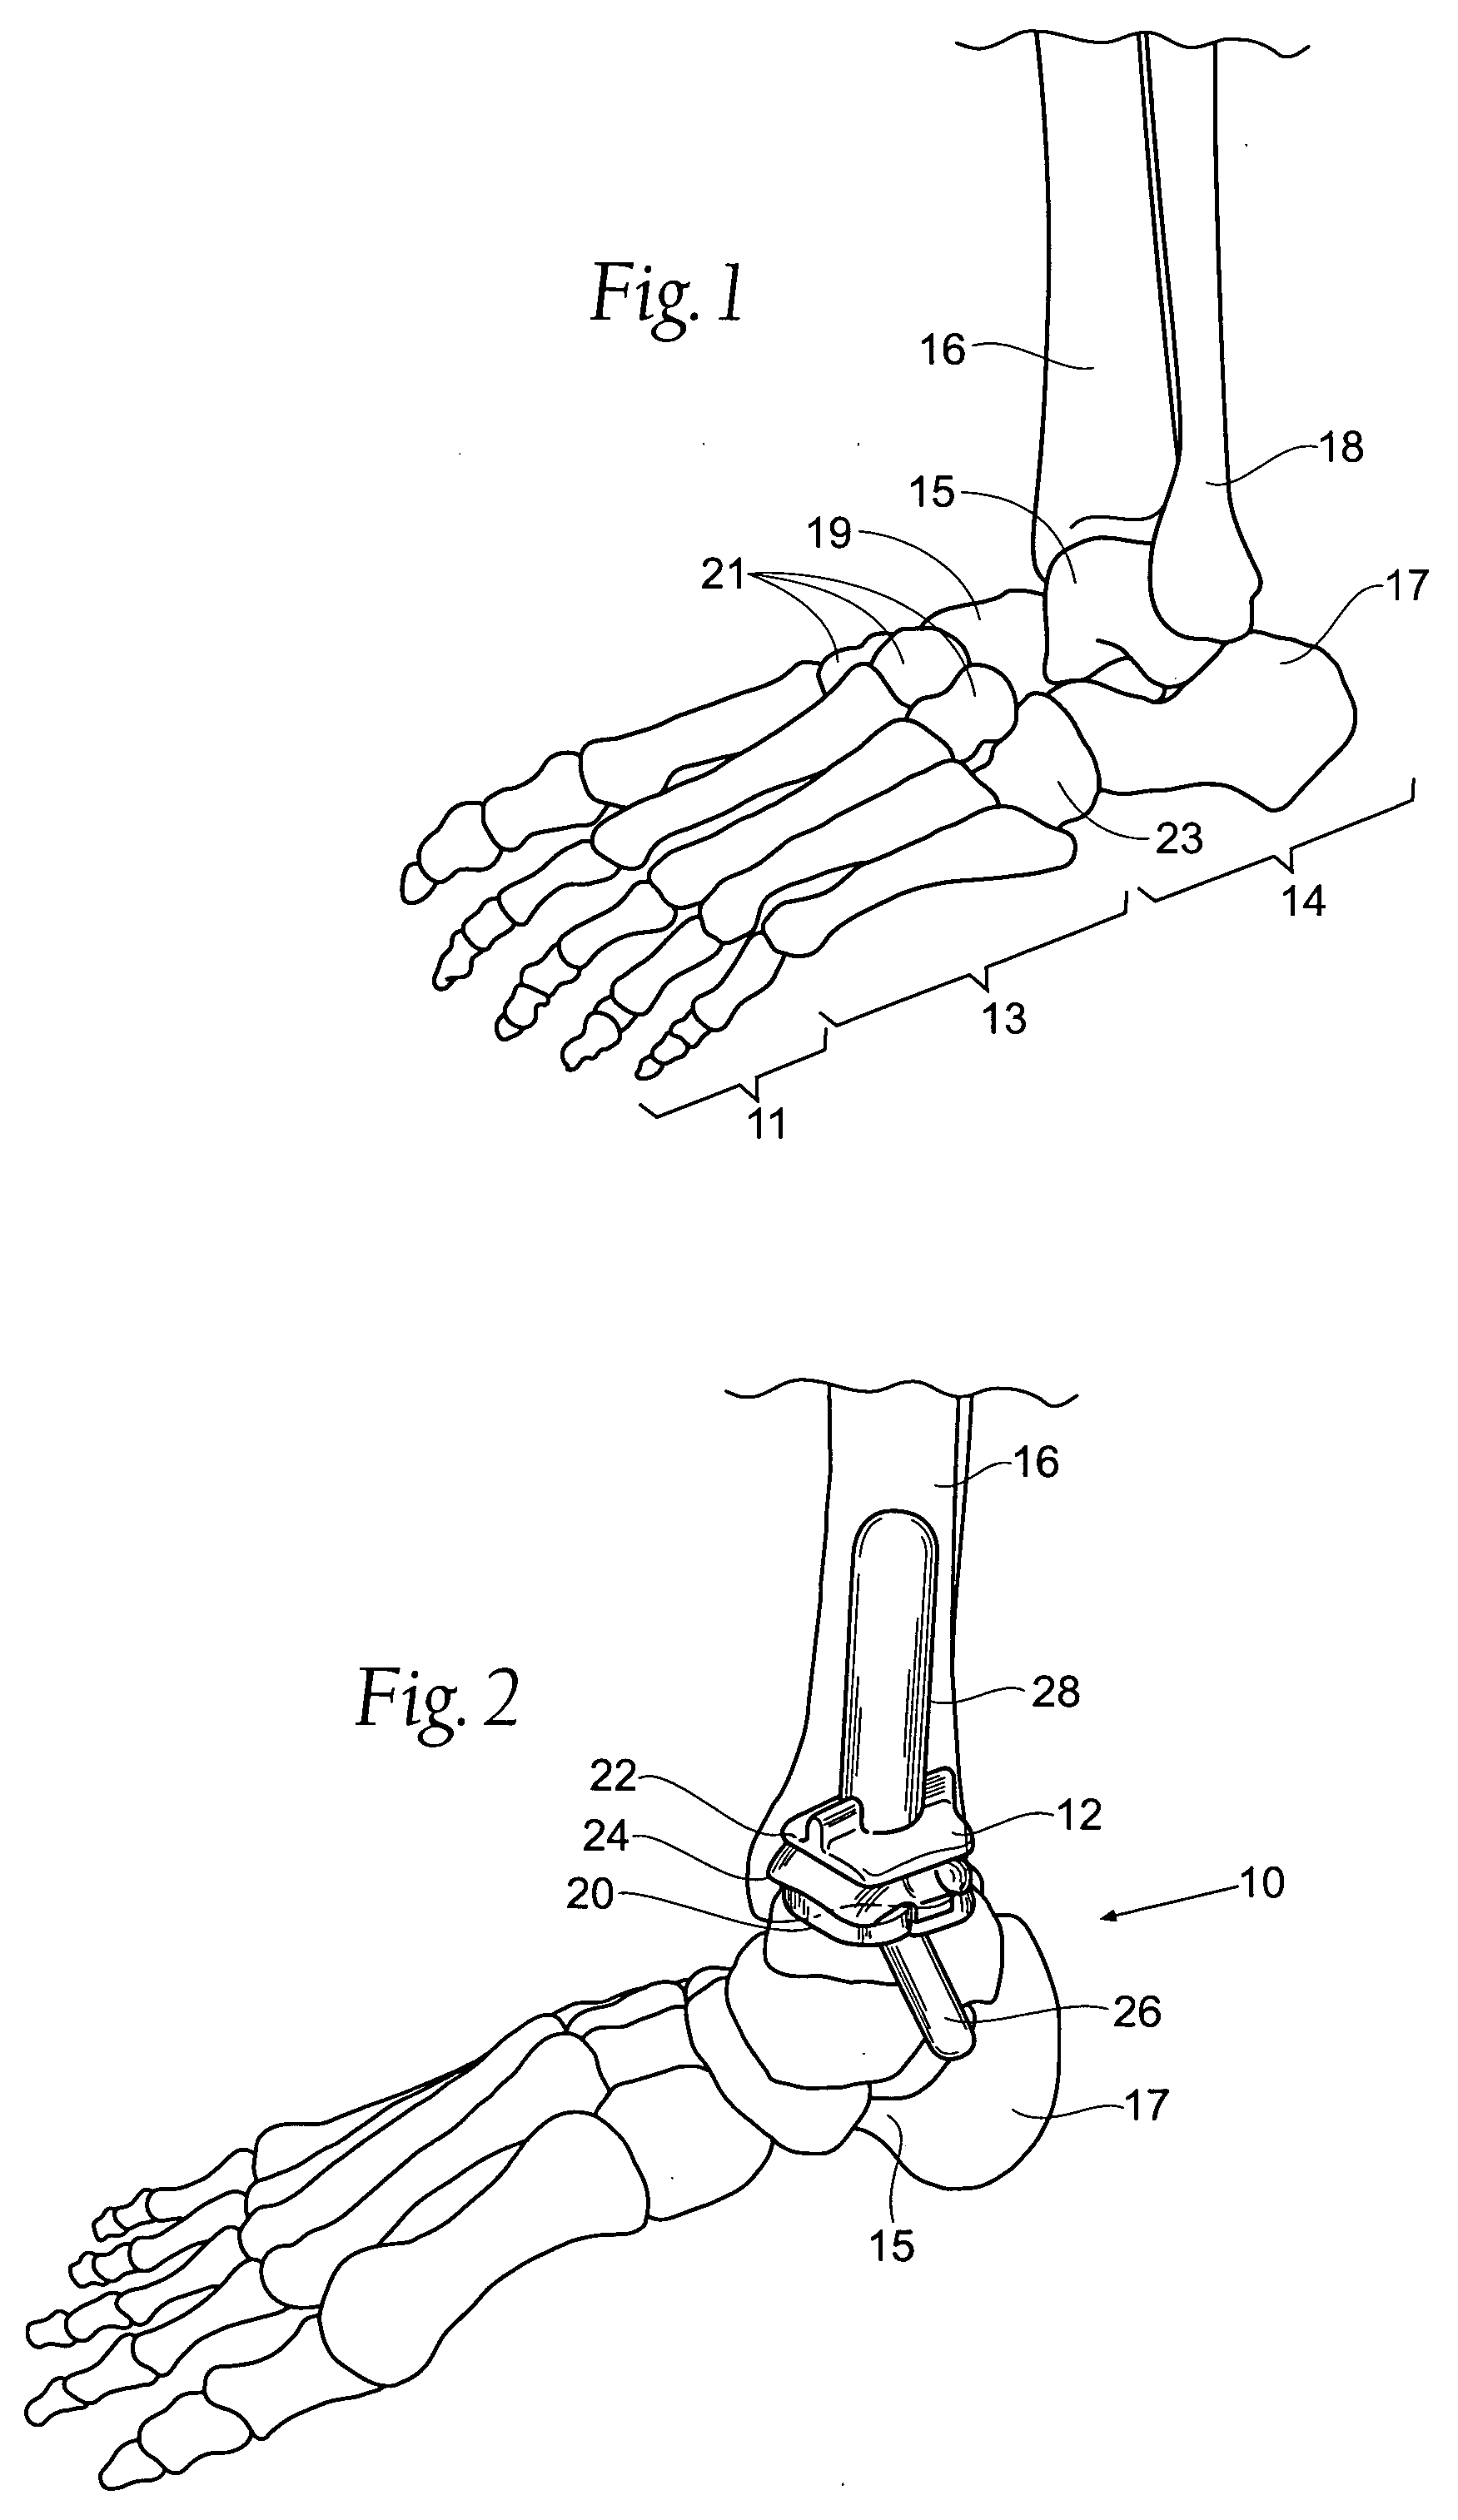 Ankle replacement system